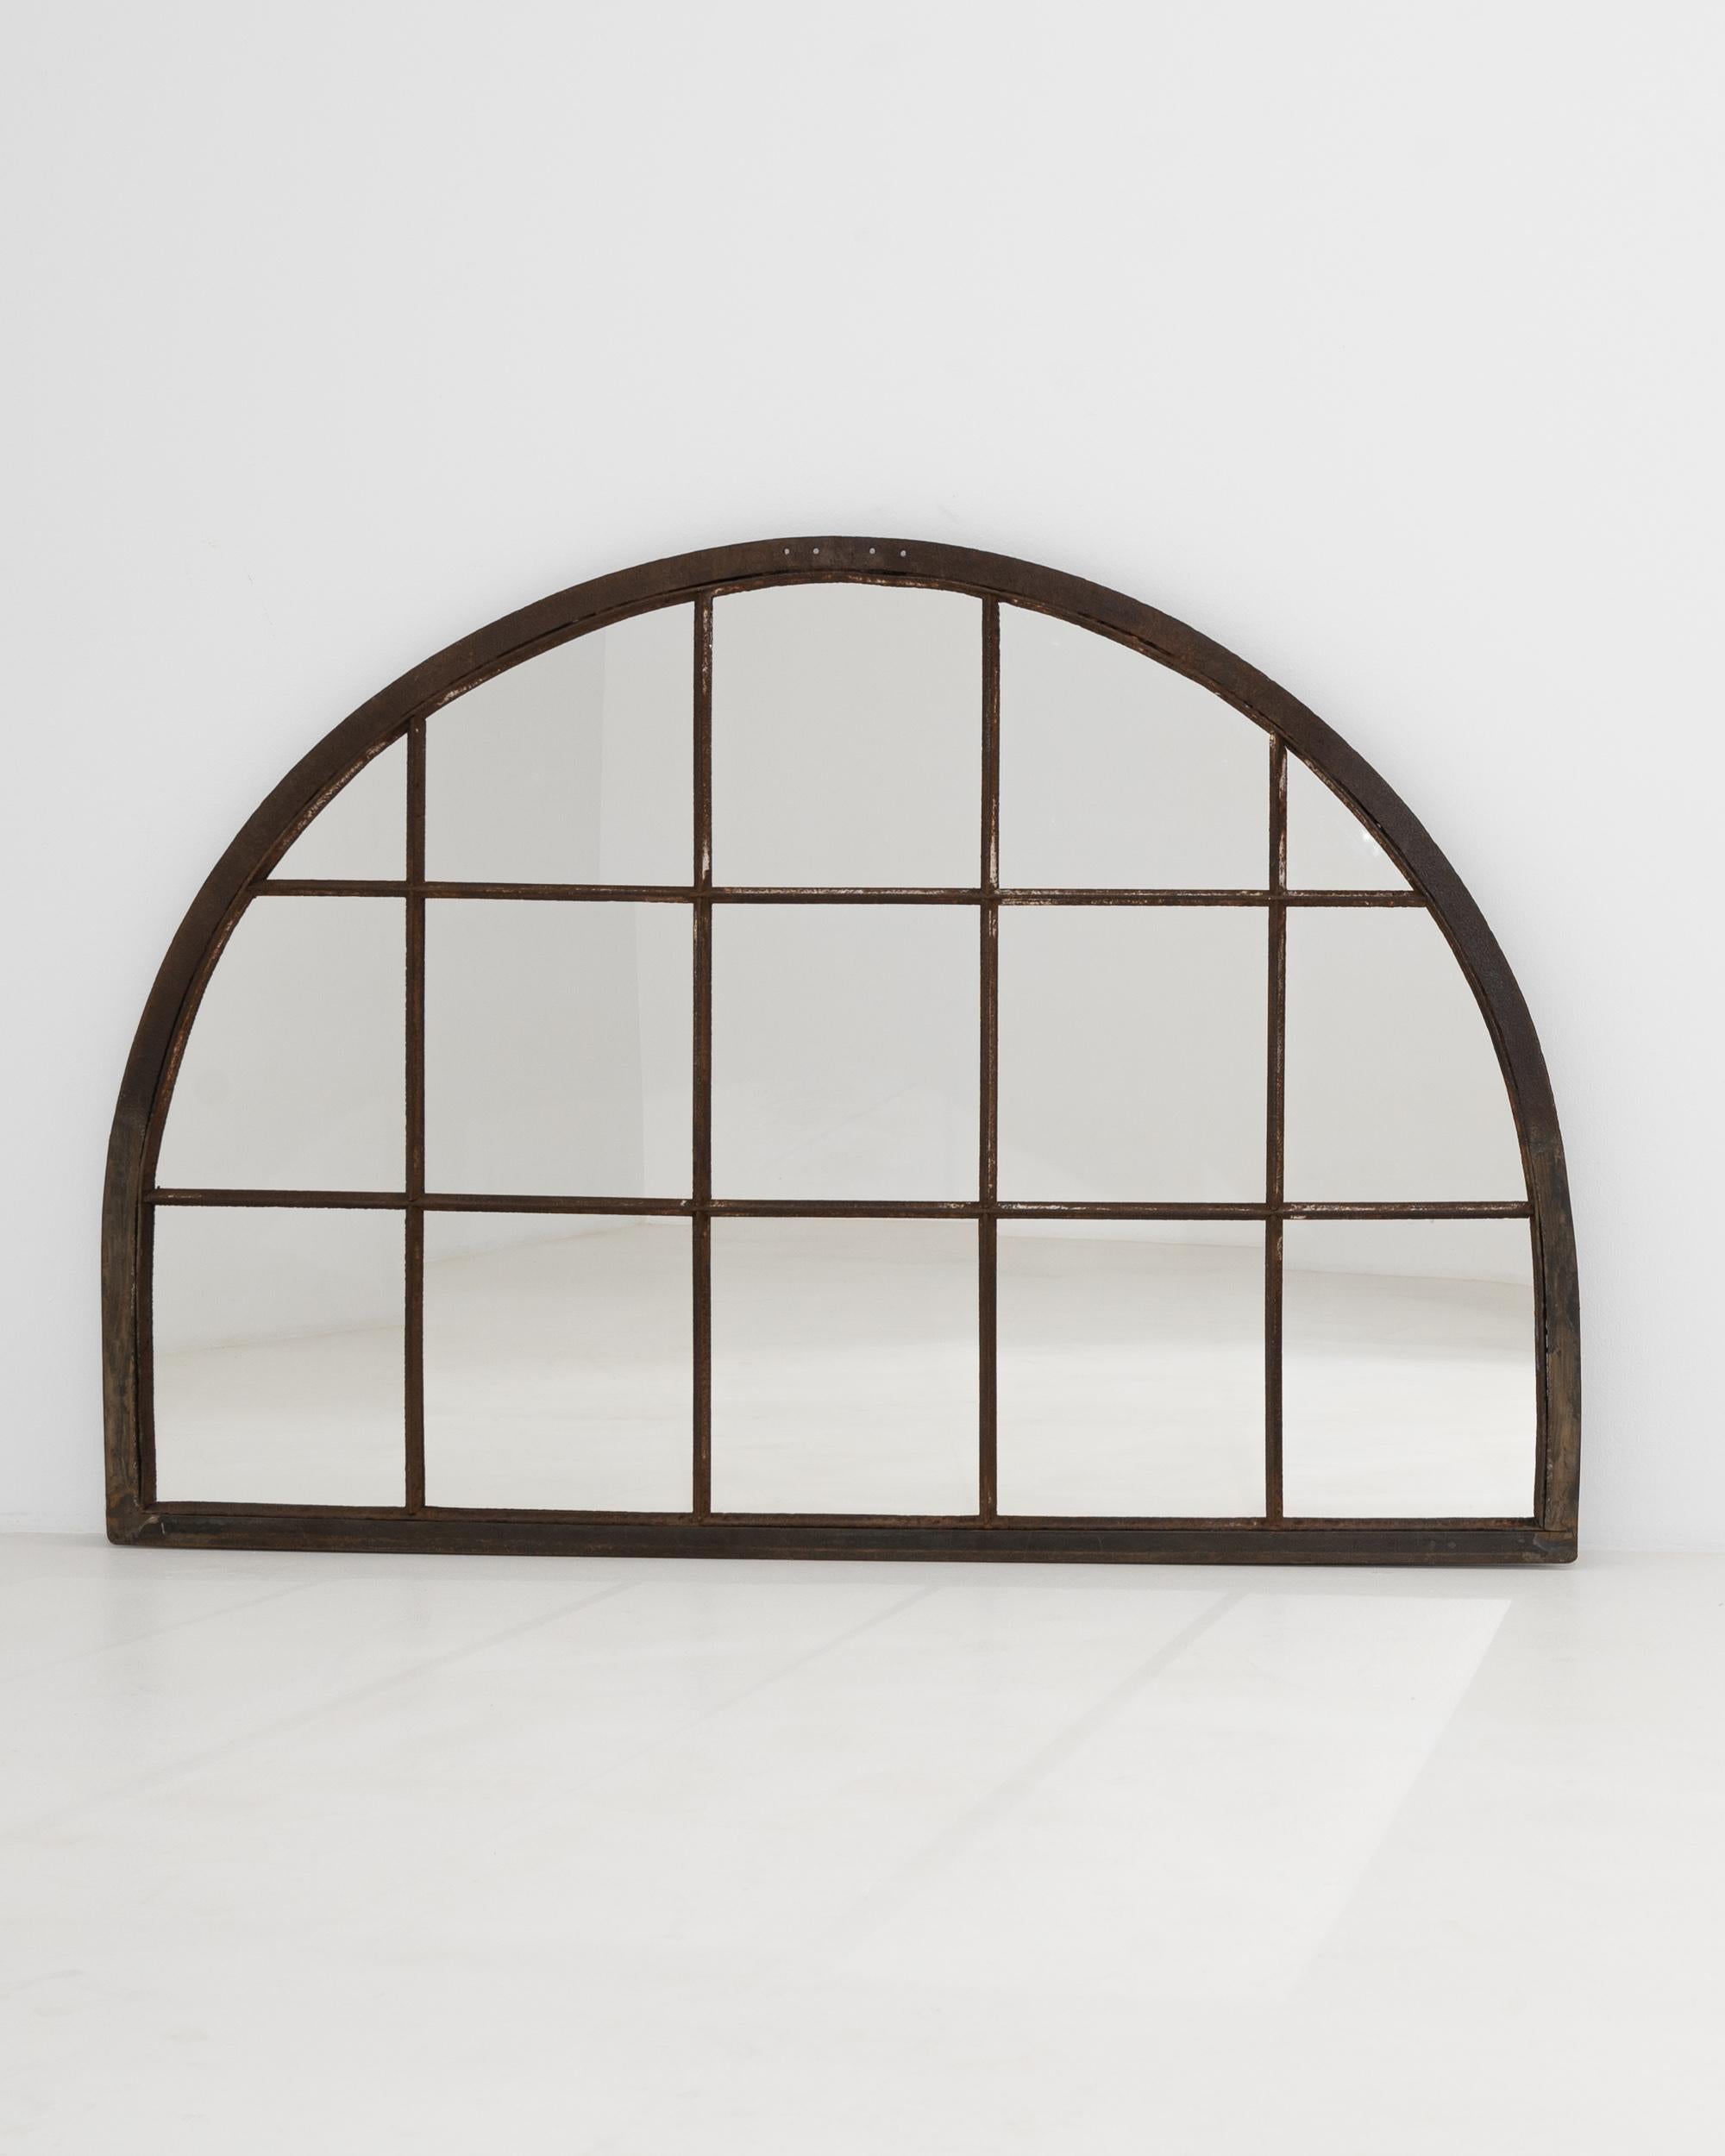 Originally used in a factory, the generous size and stripped back simplicity of this vintage mirror make for a unique Industrial accent. Made in 20th century France, the semicircular form mimics a mullioned window, amplifying natural light within an